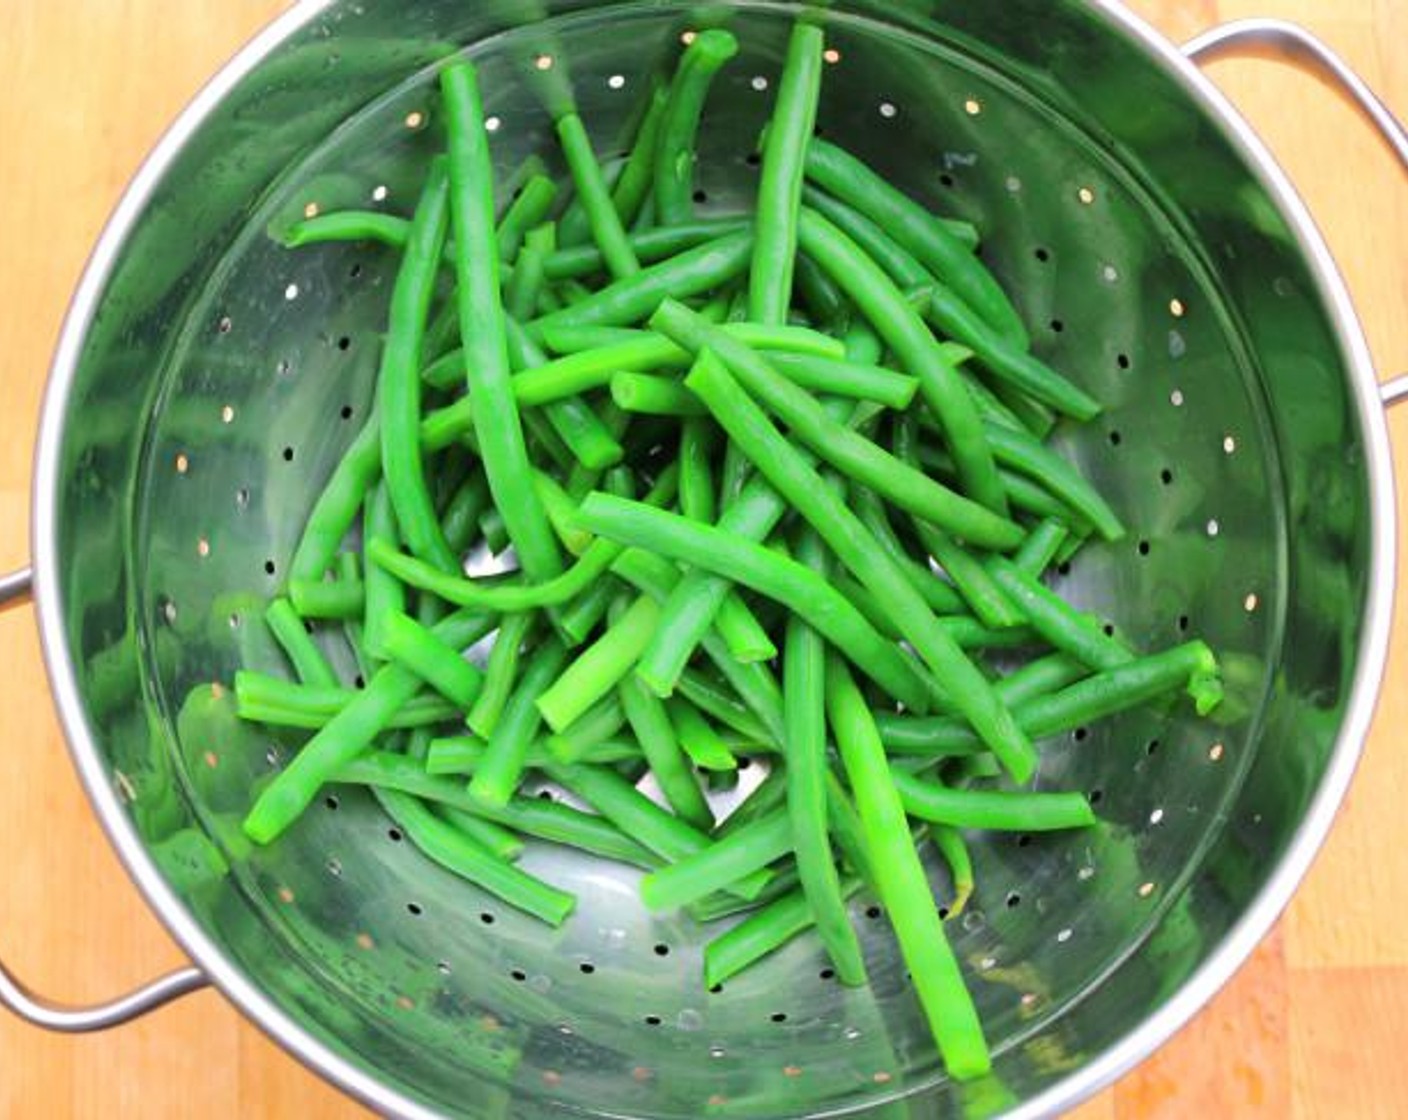 step 3 Blanche, shock, and drain the Green Beans (2 cups). "Blanching" means dropping them in boiling water for 60 seconds, then transferring them to a bowl of ice water to stop the cooking.